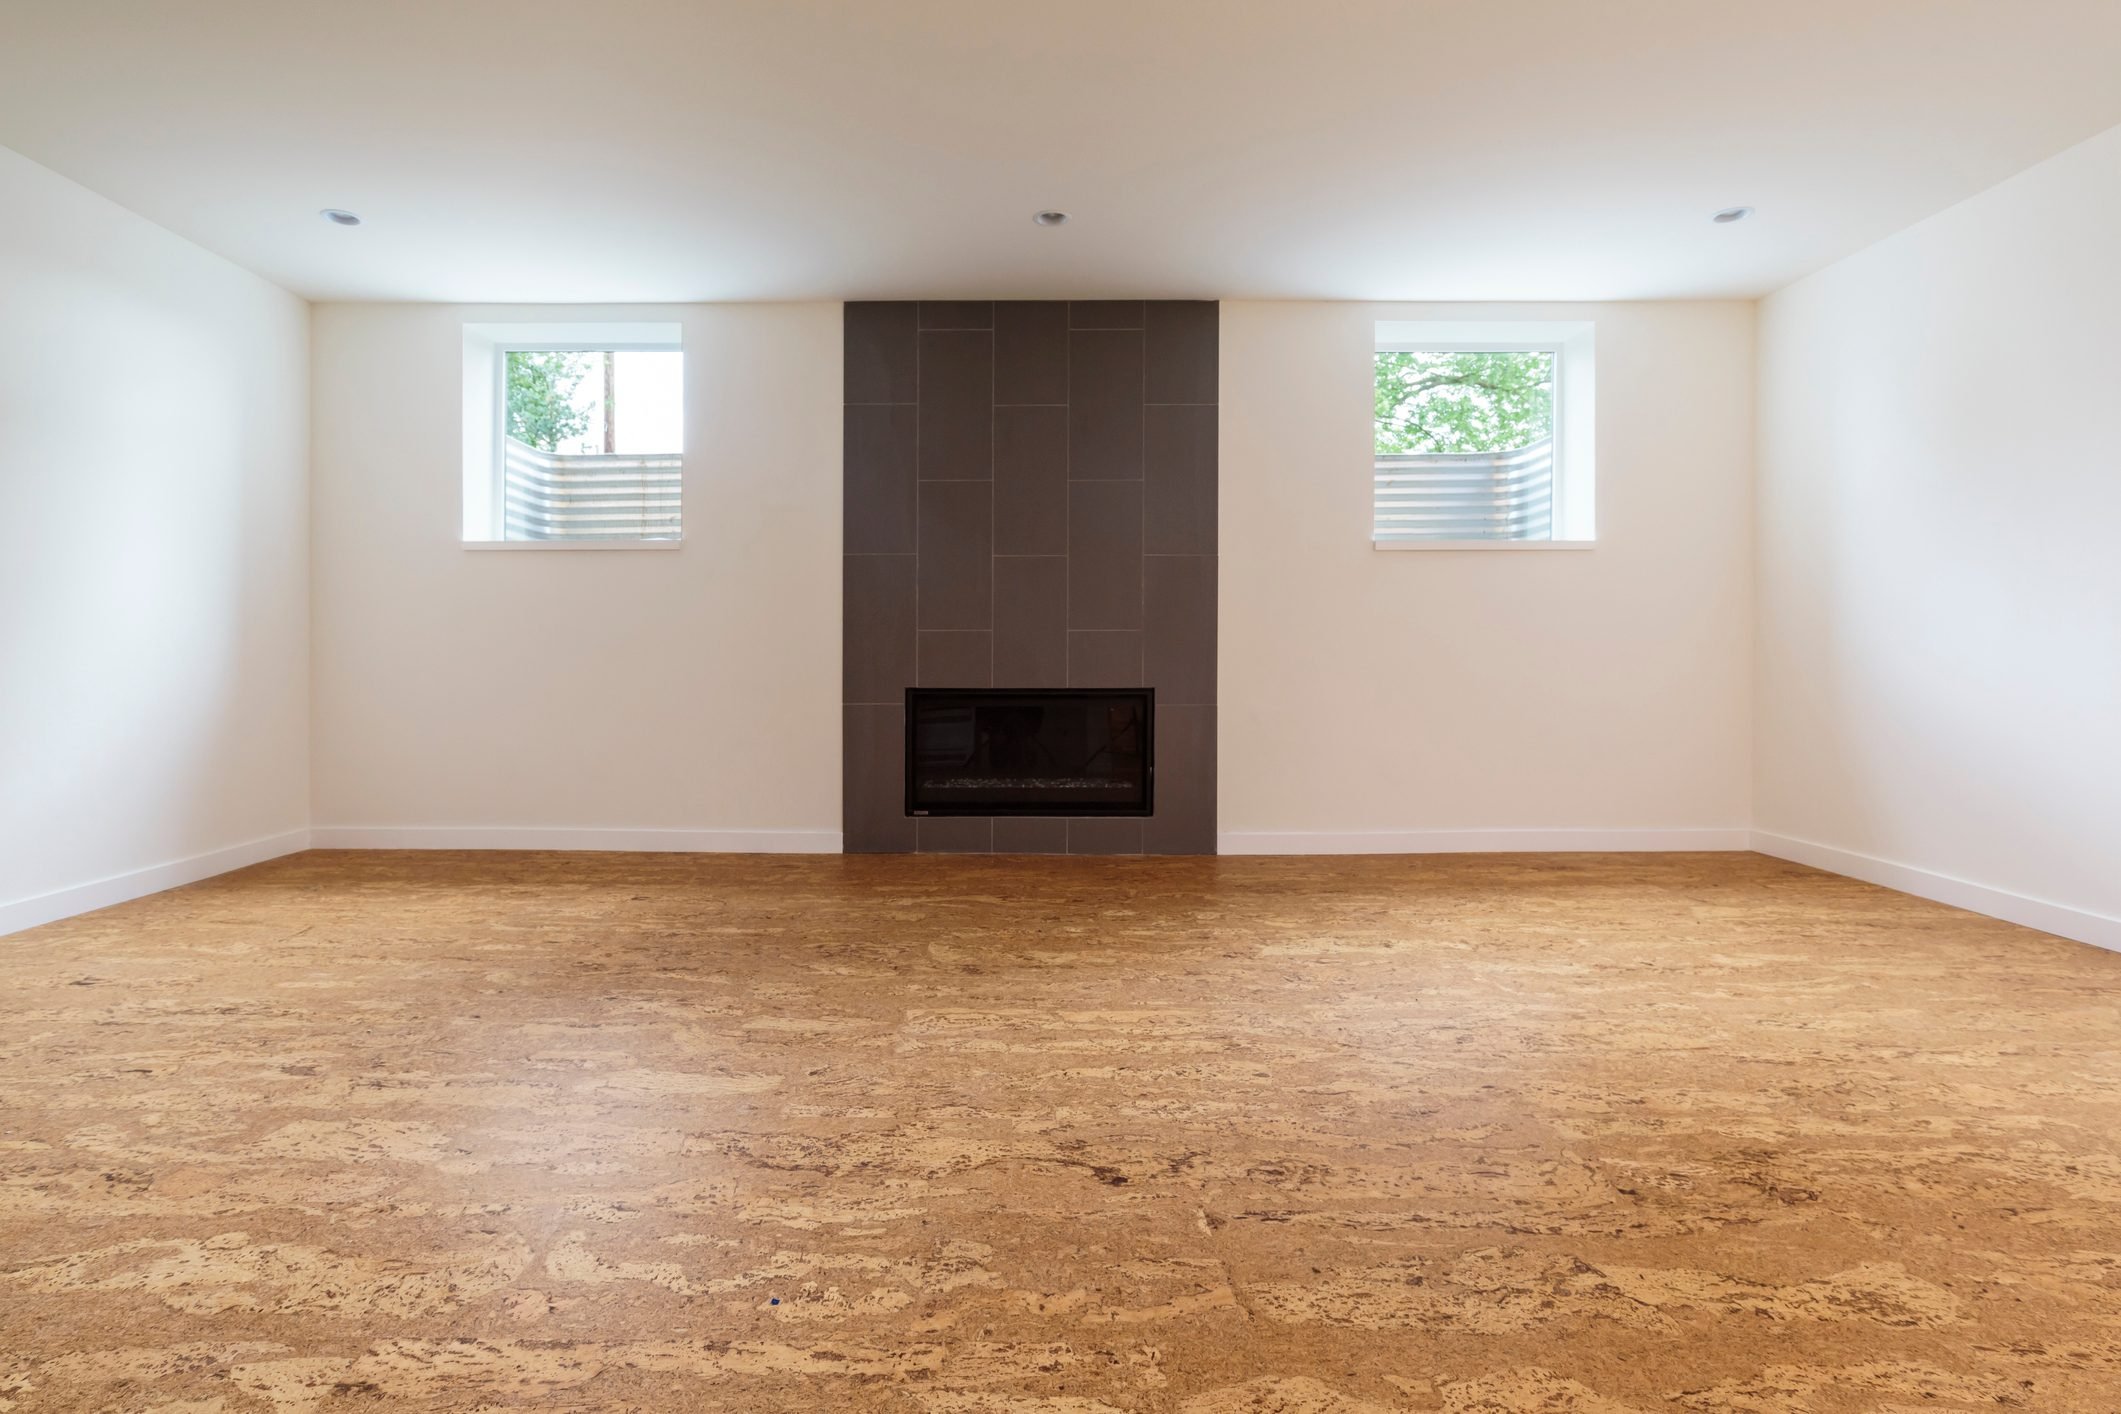 Cork flooring in unfurnished new home